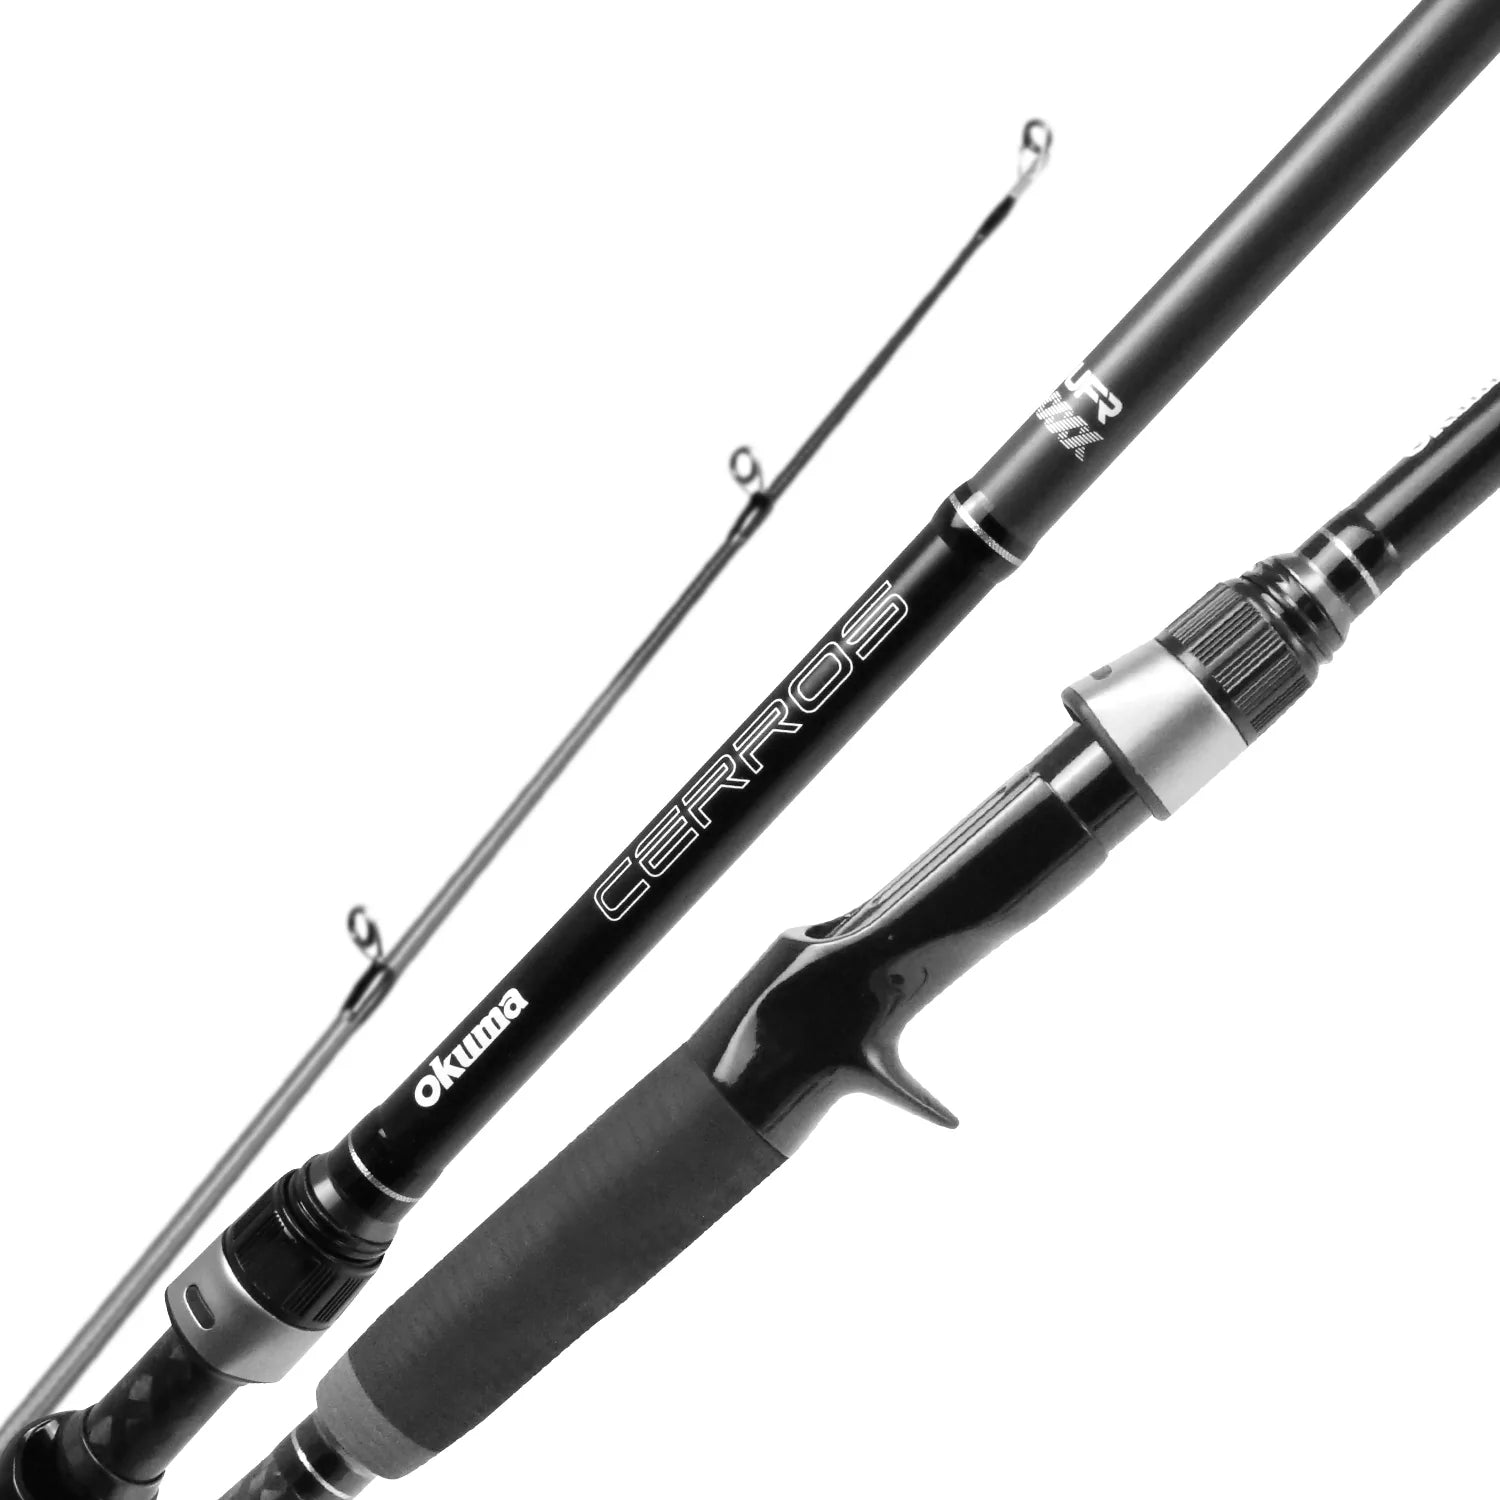 Check out our latest article Okuma's Solaris Surf Fishing …